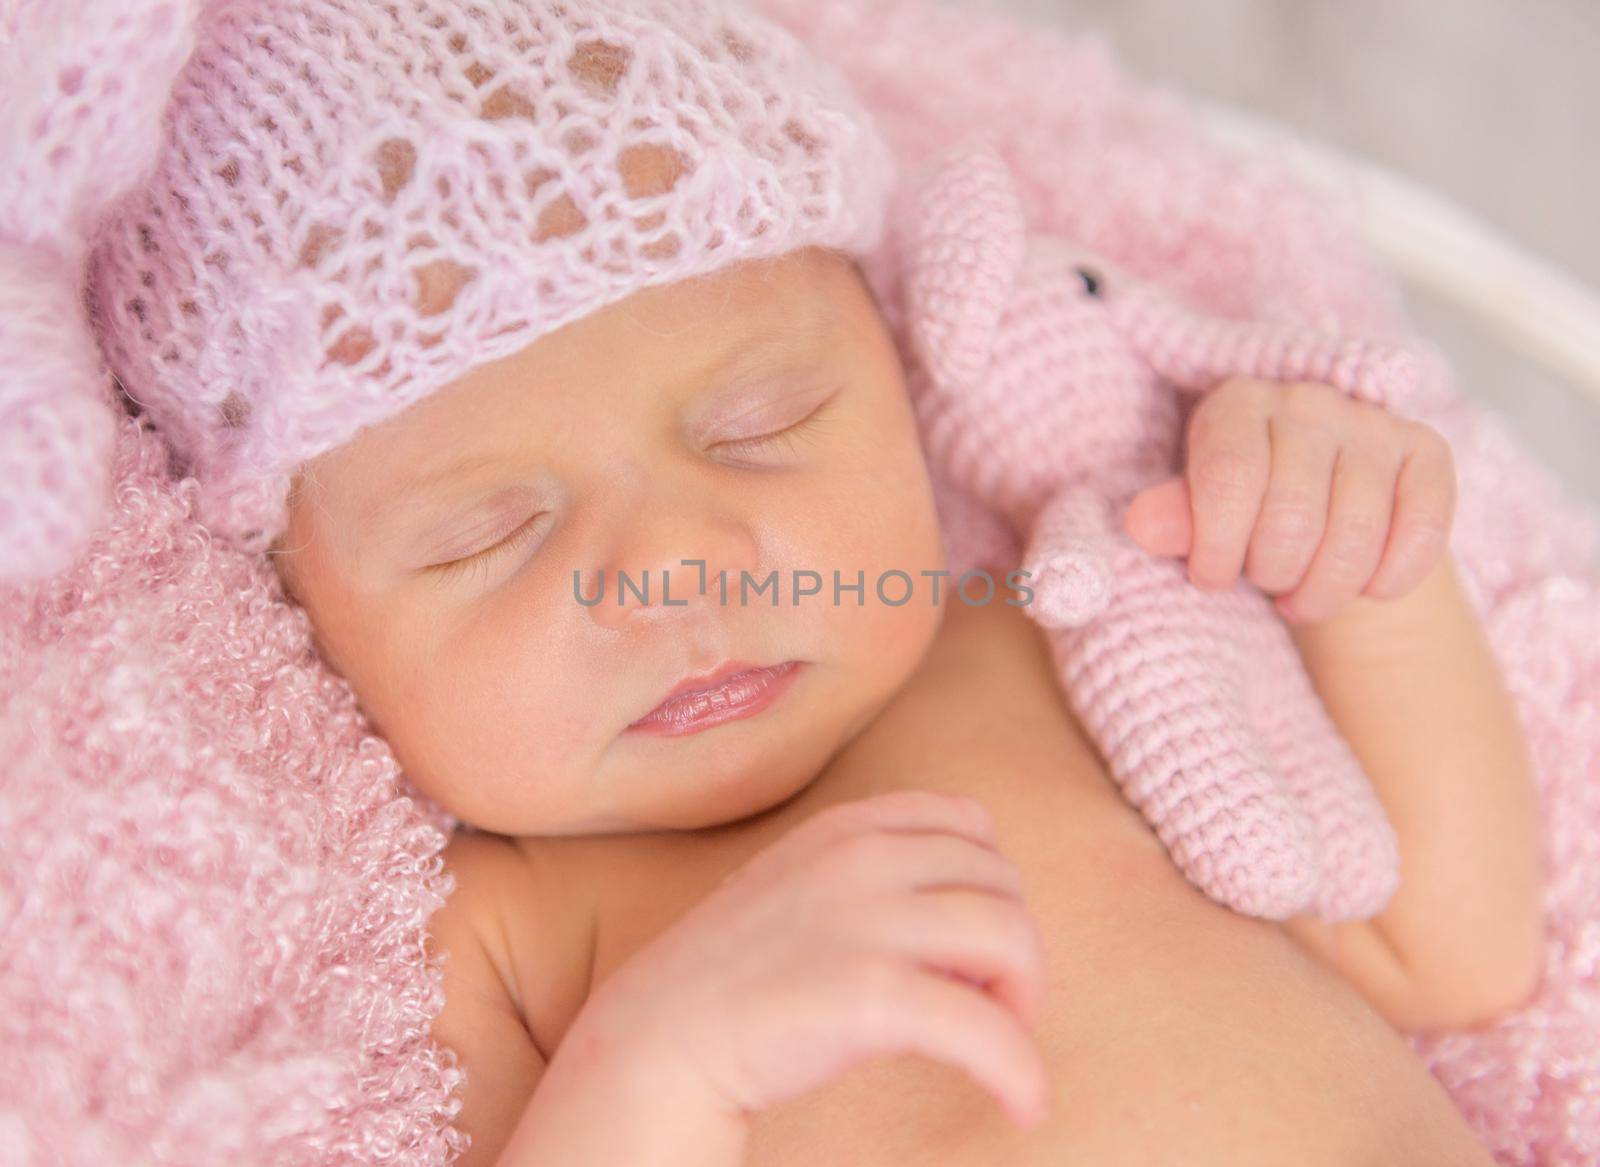 lovely newborn girl in pink panties and hat in basket by tan4ikk1